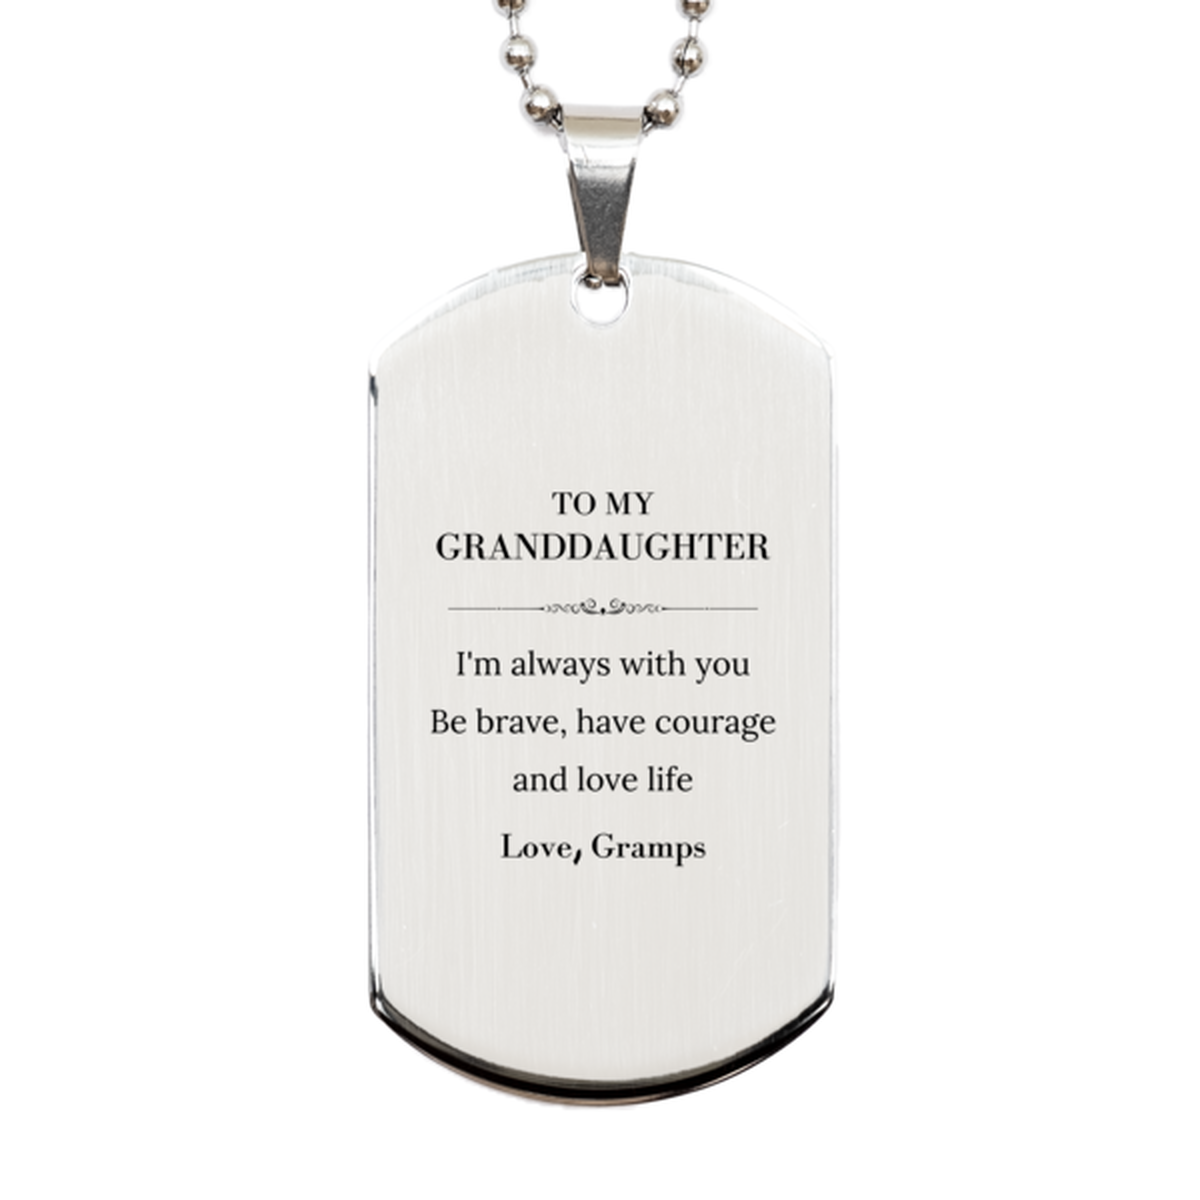 To My Granddaughter Gifts from Gramps, Unique Silver Dog Tag Inspirational Christmas Birthday Graduation Gifts for Granddaughter I'm always with you. Be brave, have courage and love life. Love, Gramps